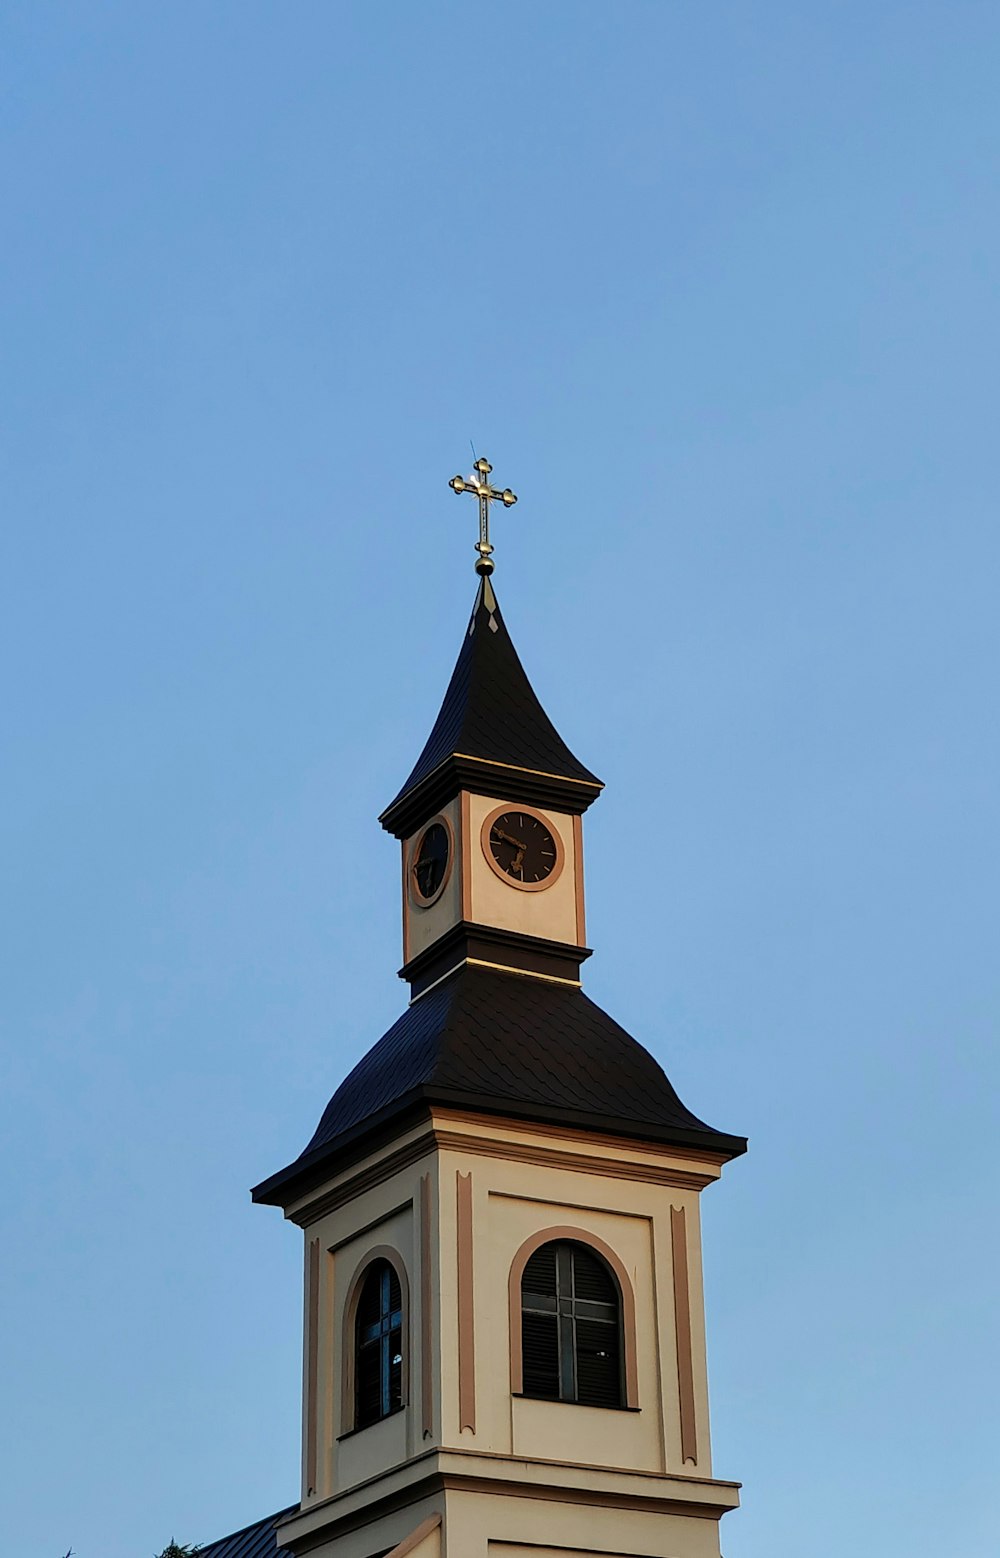 a clock tower with a cross on top of it